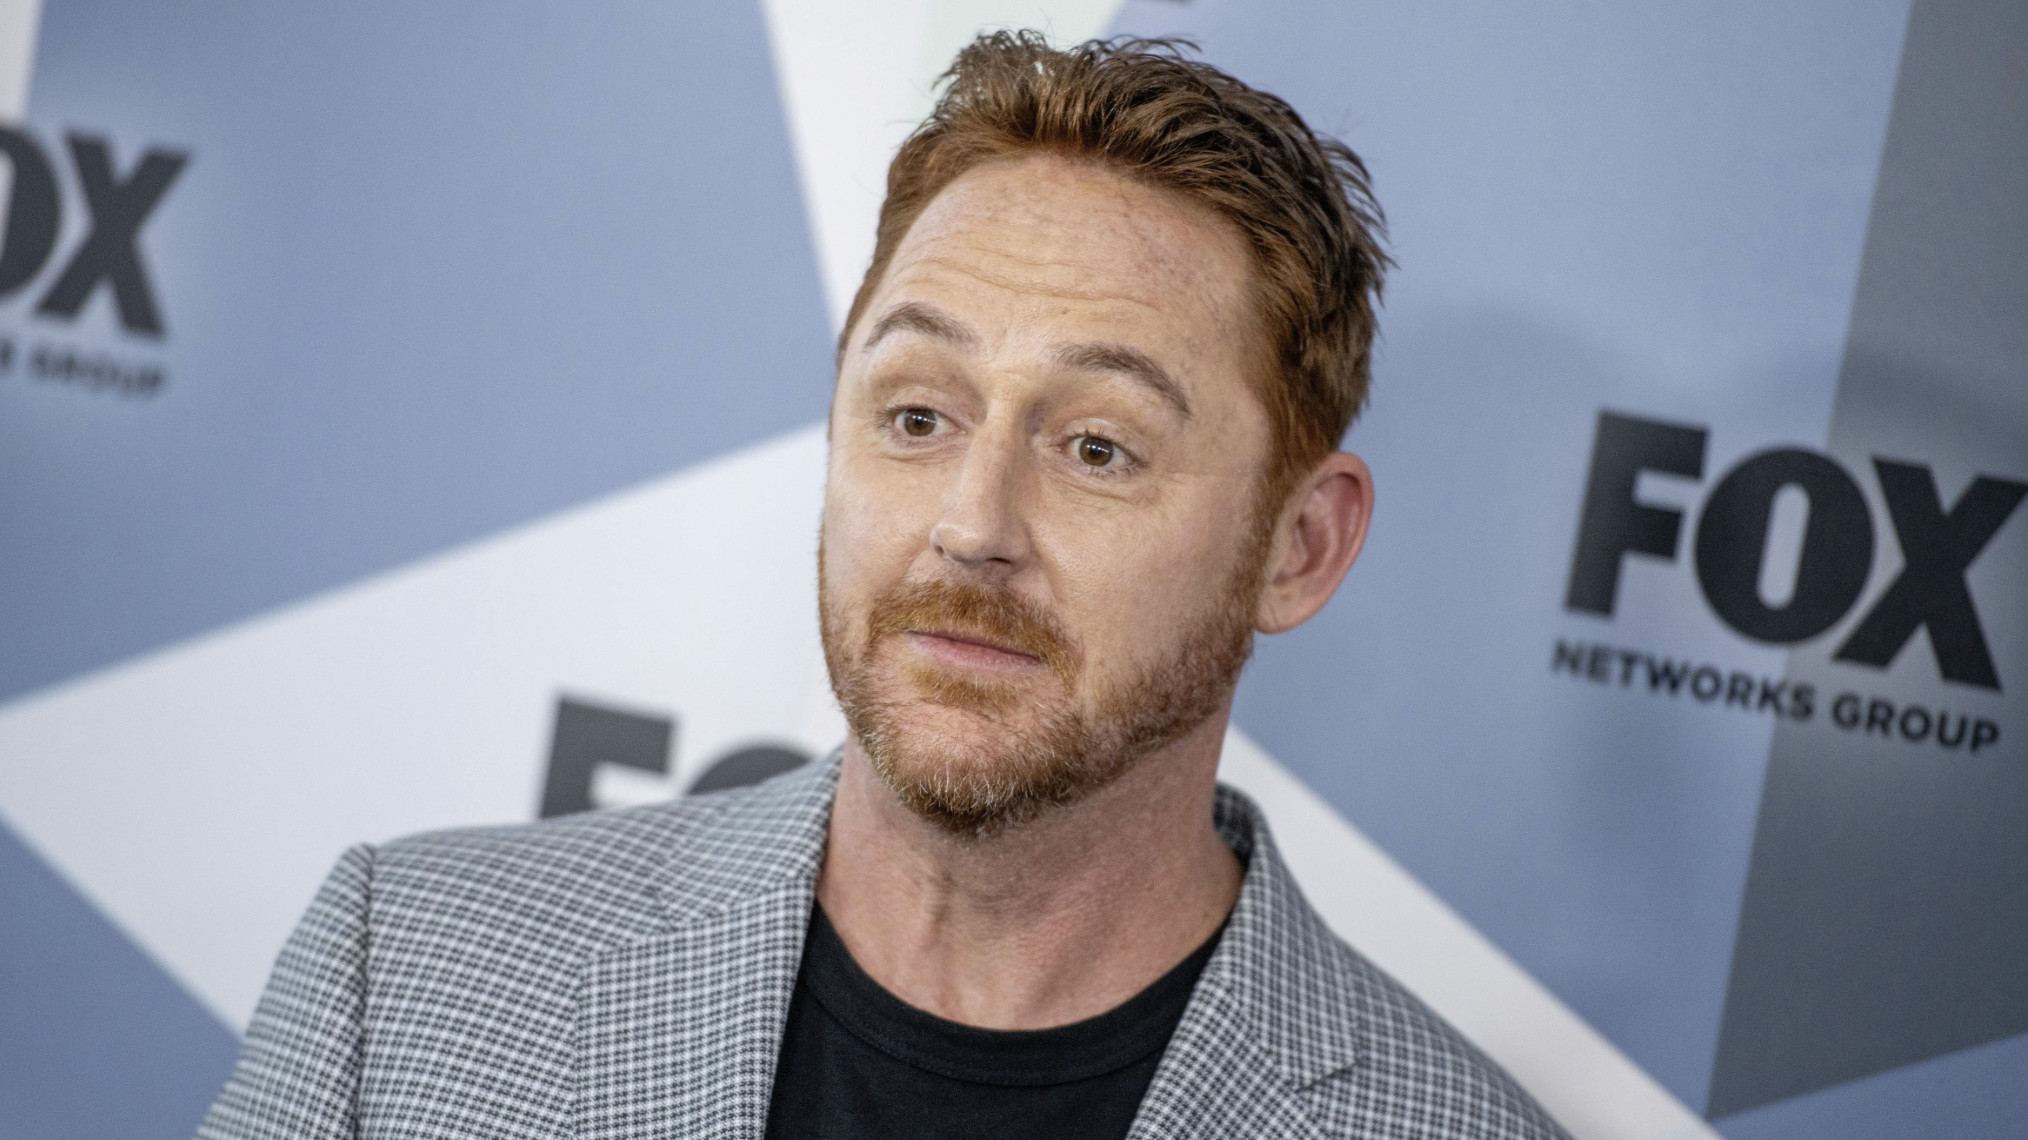 Scott Grimes at FOX networks group event